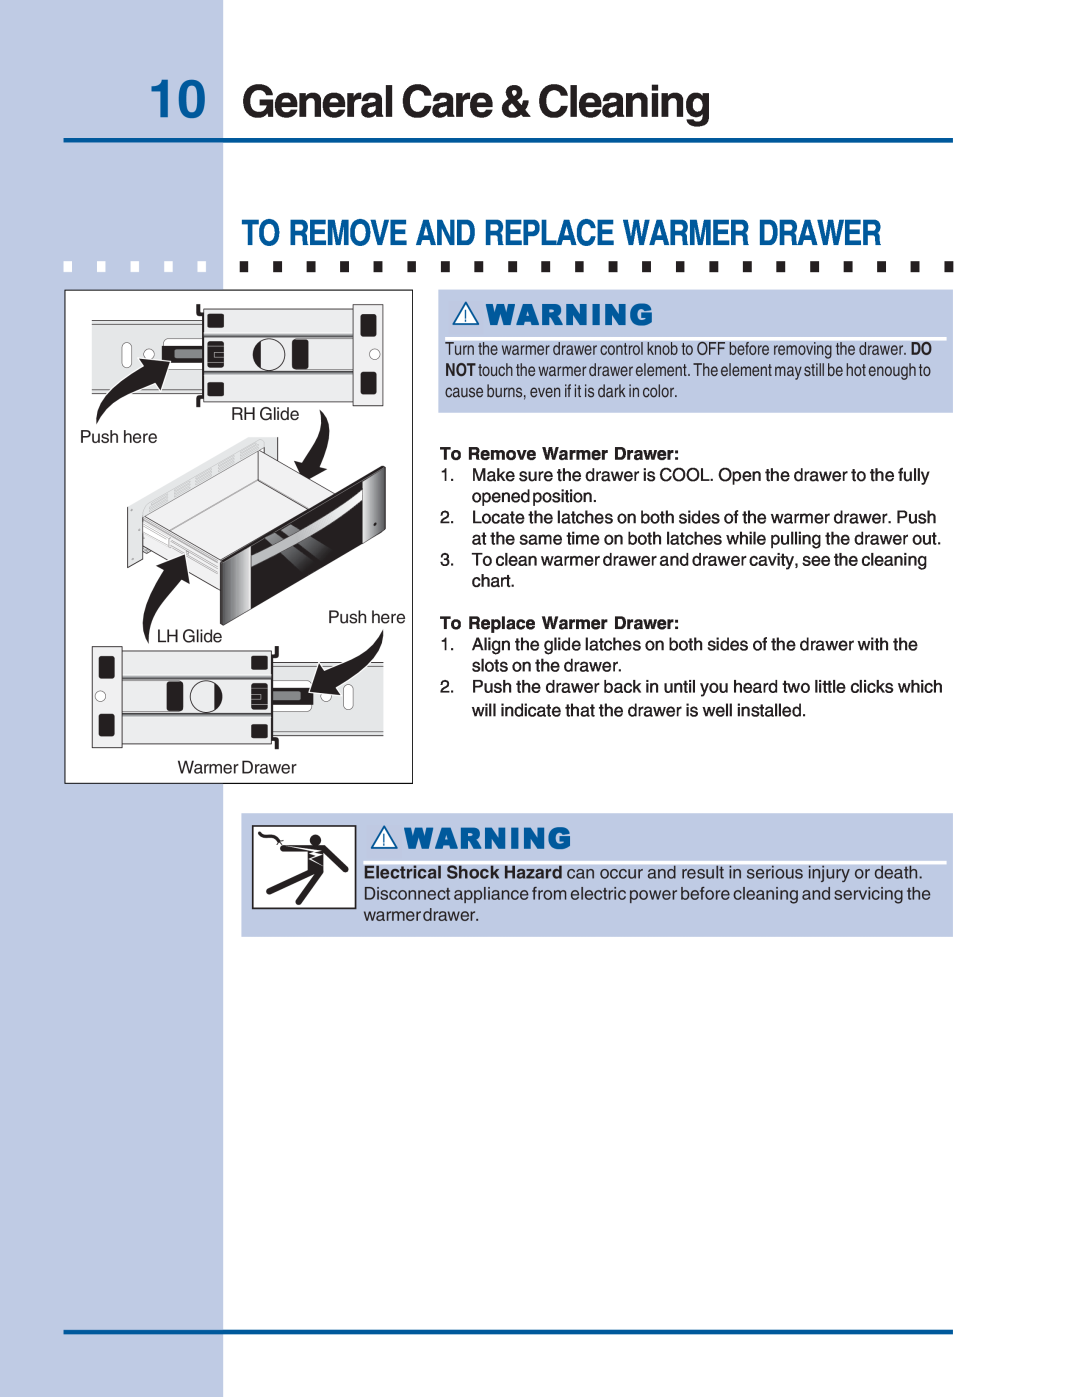 Electrolux Warm & Serve Drawer manual General Care & Cleaning, To Remove And Replace Warmer Drawer 